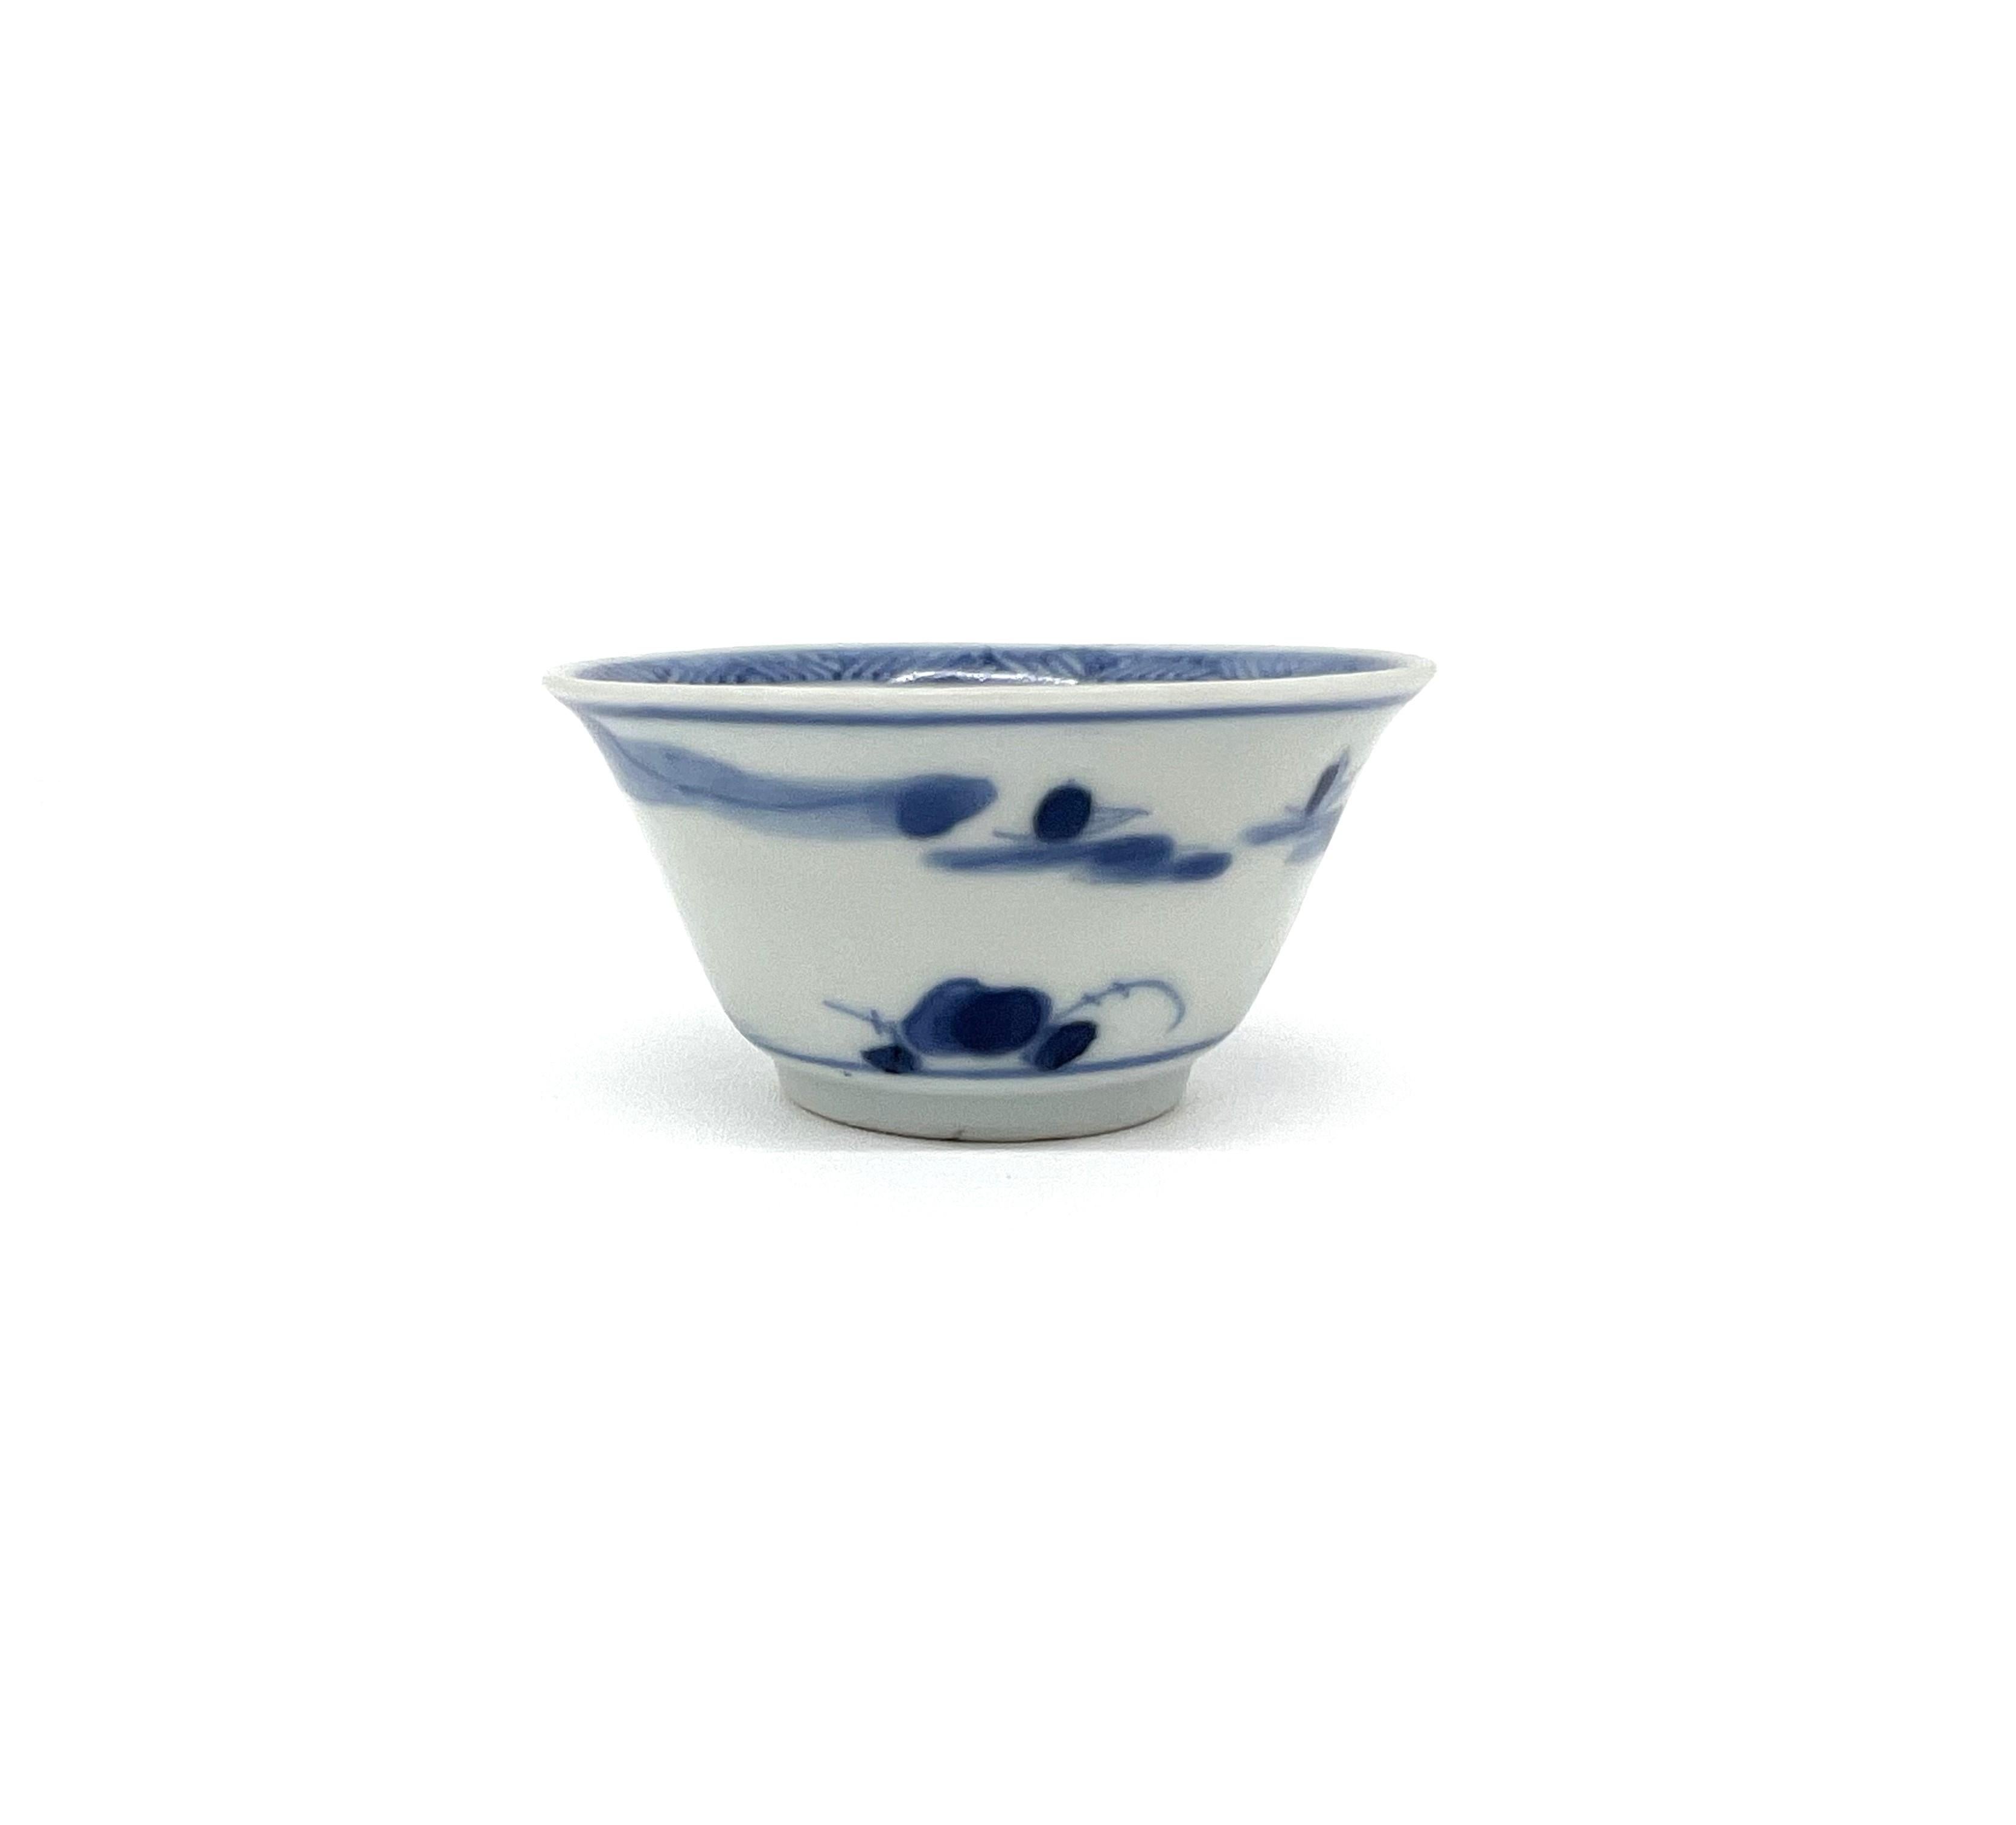 The serene landscape and leisure activity of fishing are meticulously captured in cobalt blue on the porcelain's white surface, suggesting the value placed on harmony with the natural world. The bowl's shape is traditional, with a broad rim and deep